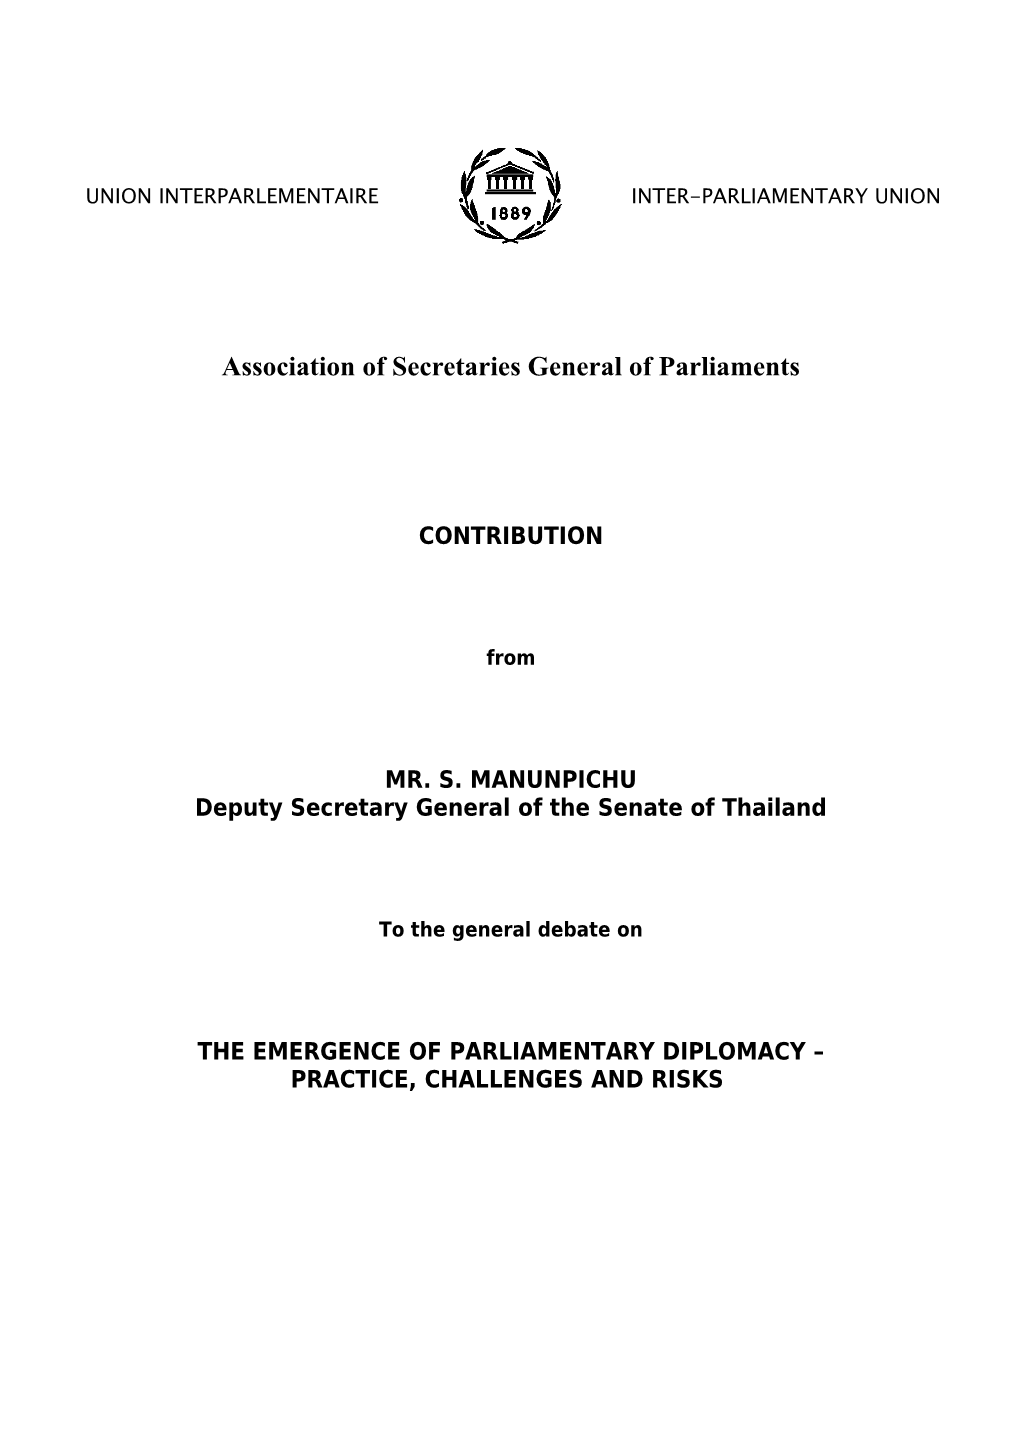 Parliamentary Diplomacy of Senators and the Supporting Performances in Foreign Affairs